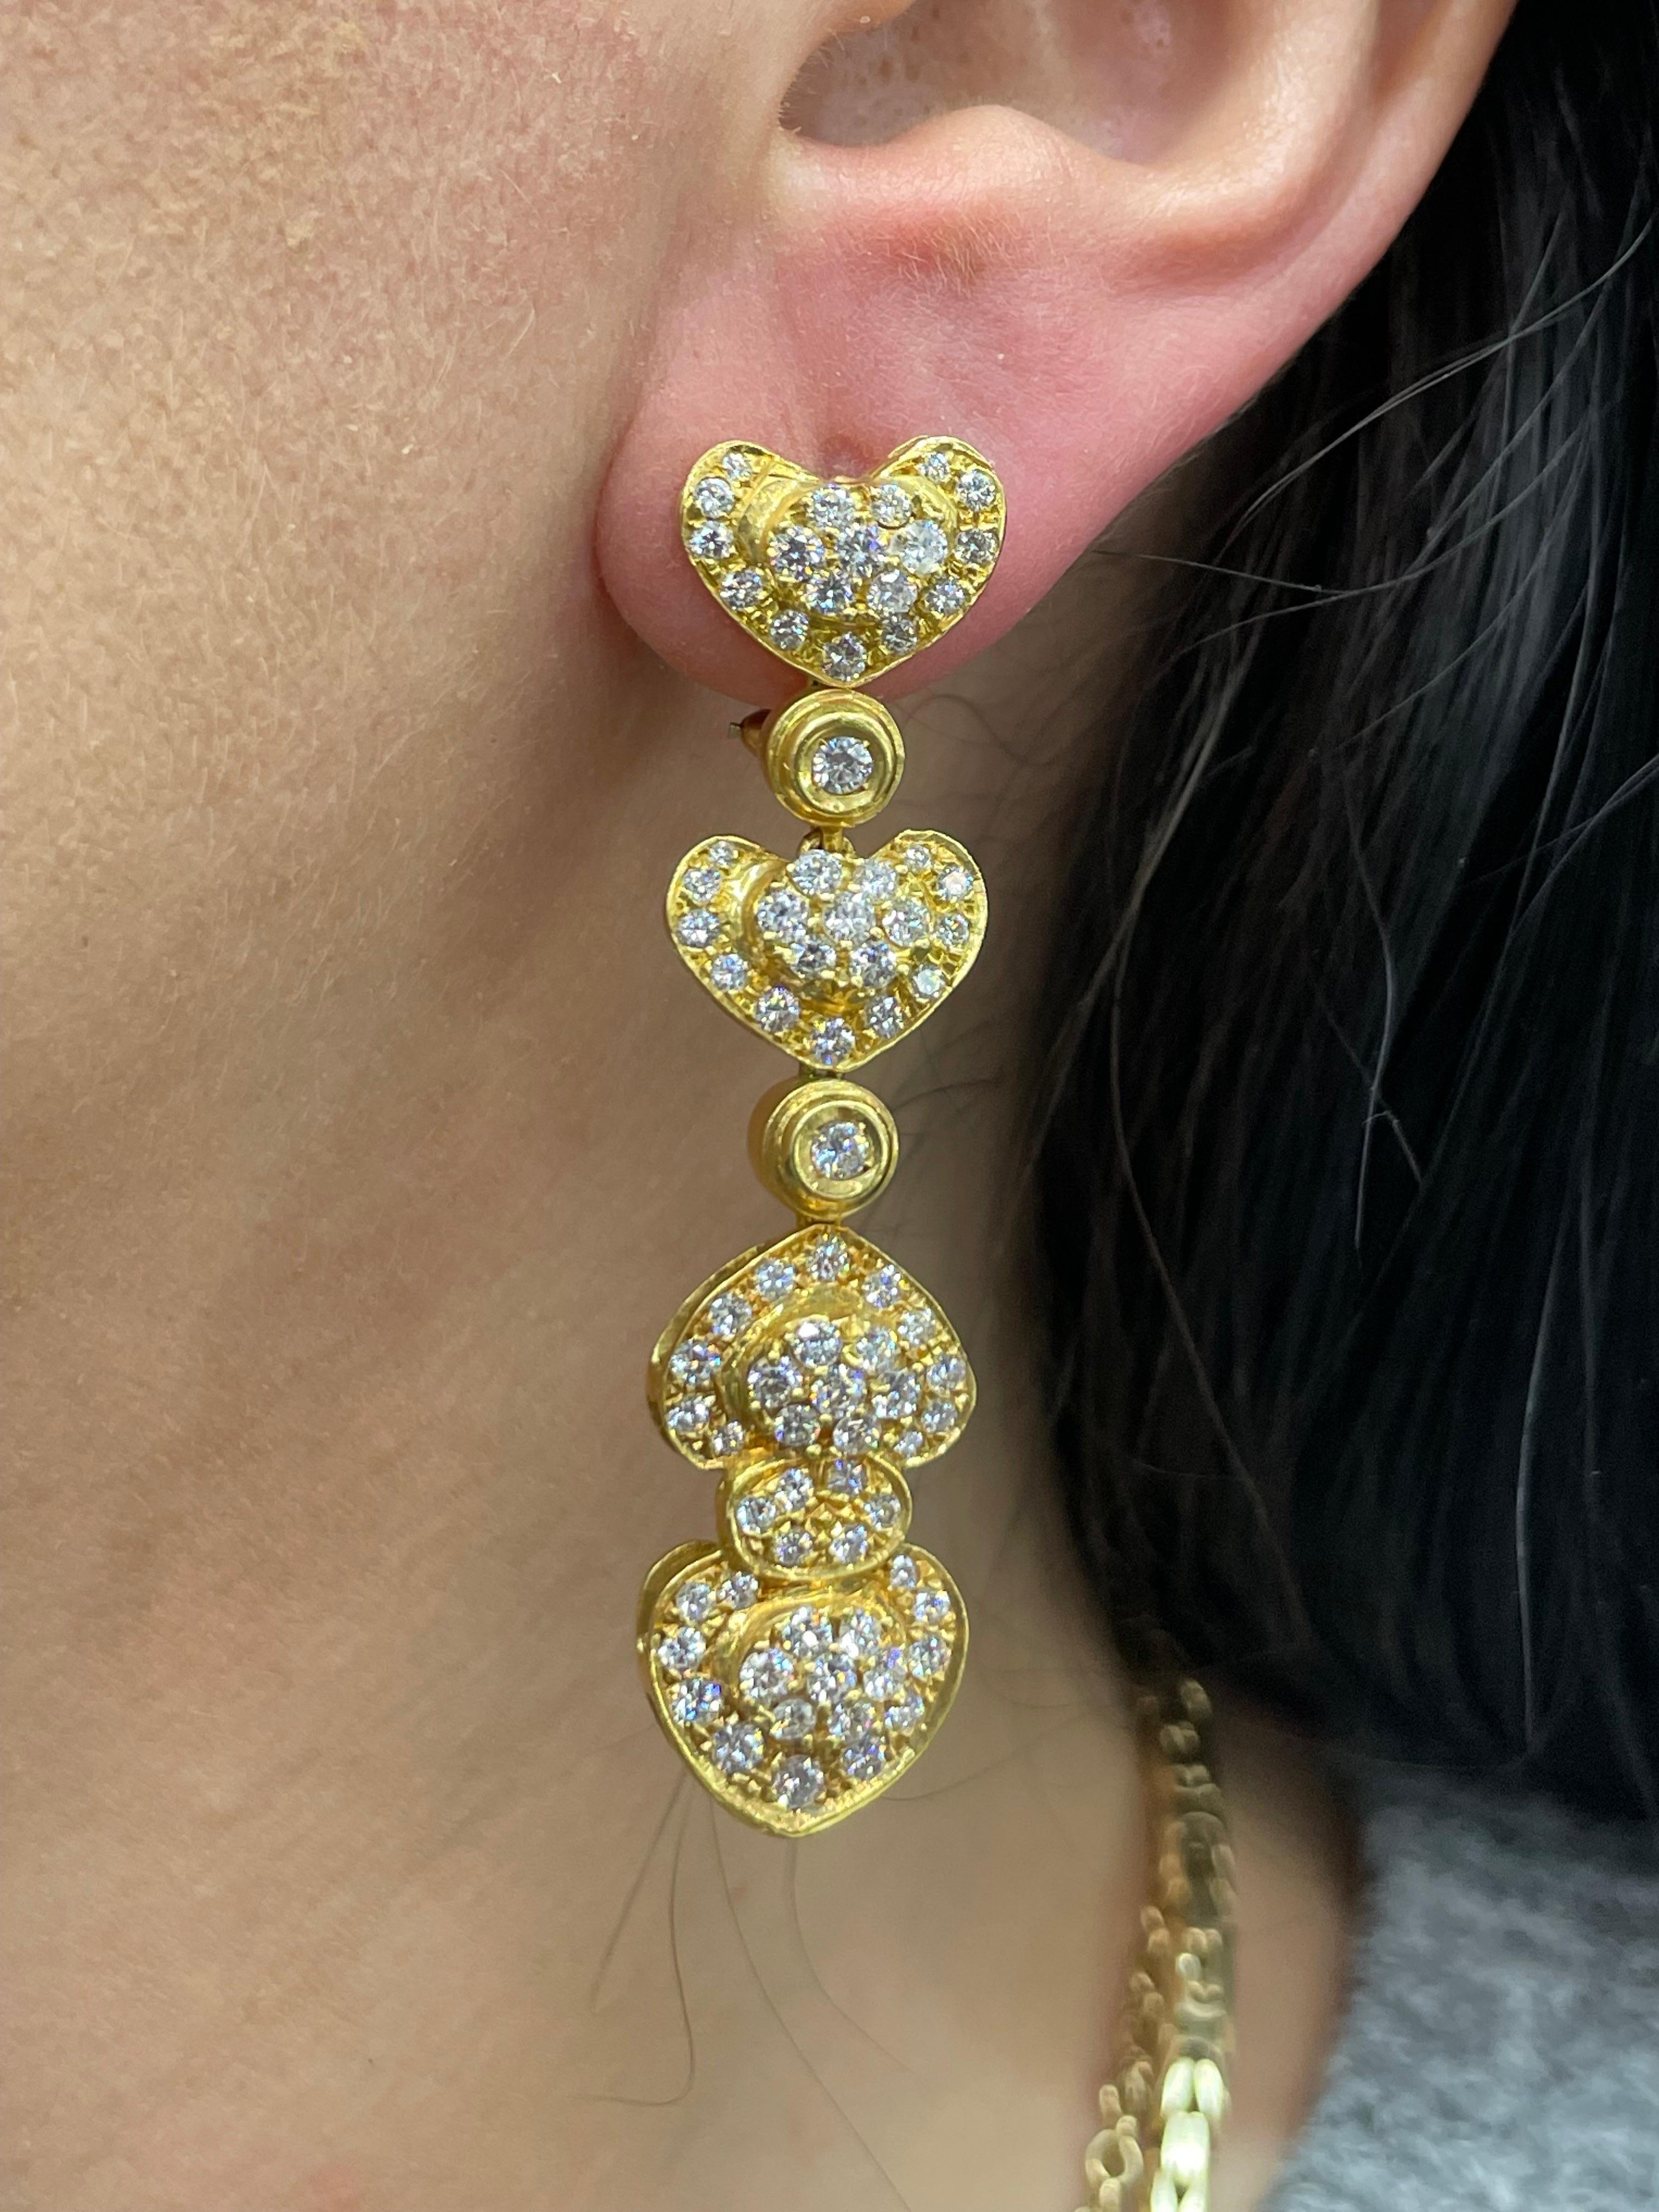 Circa 1980's, this Vintage heart motif diamond drop earrings feature 160 Round Brilliants weighing approximately 4.50 carats.
Color F-G
Clarity SI